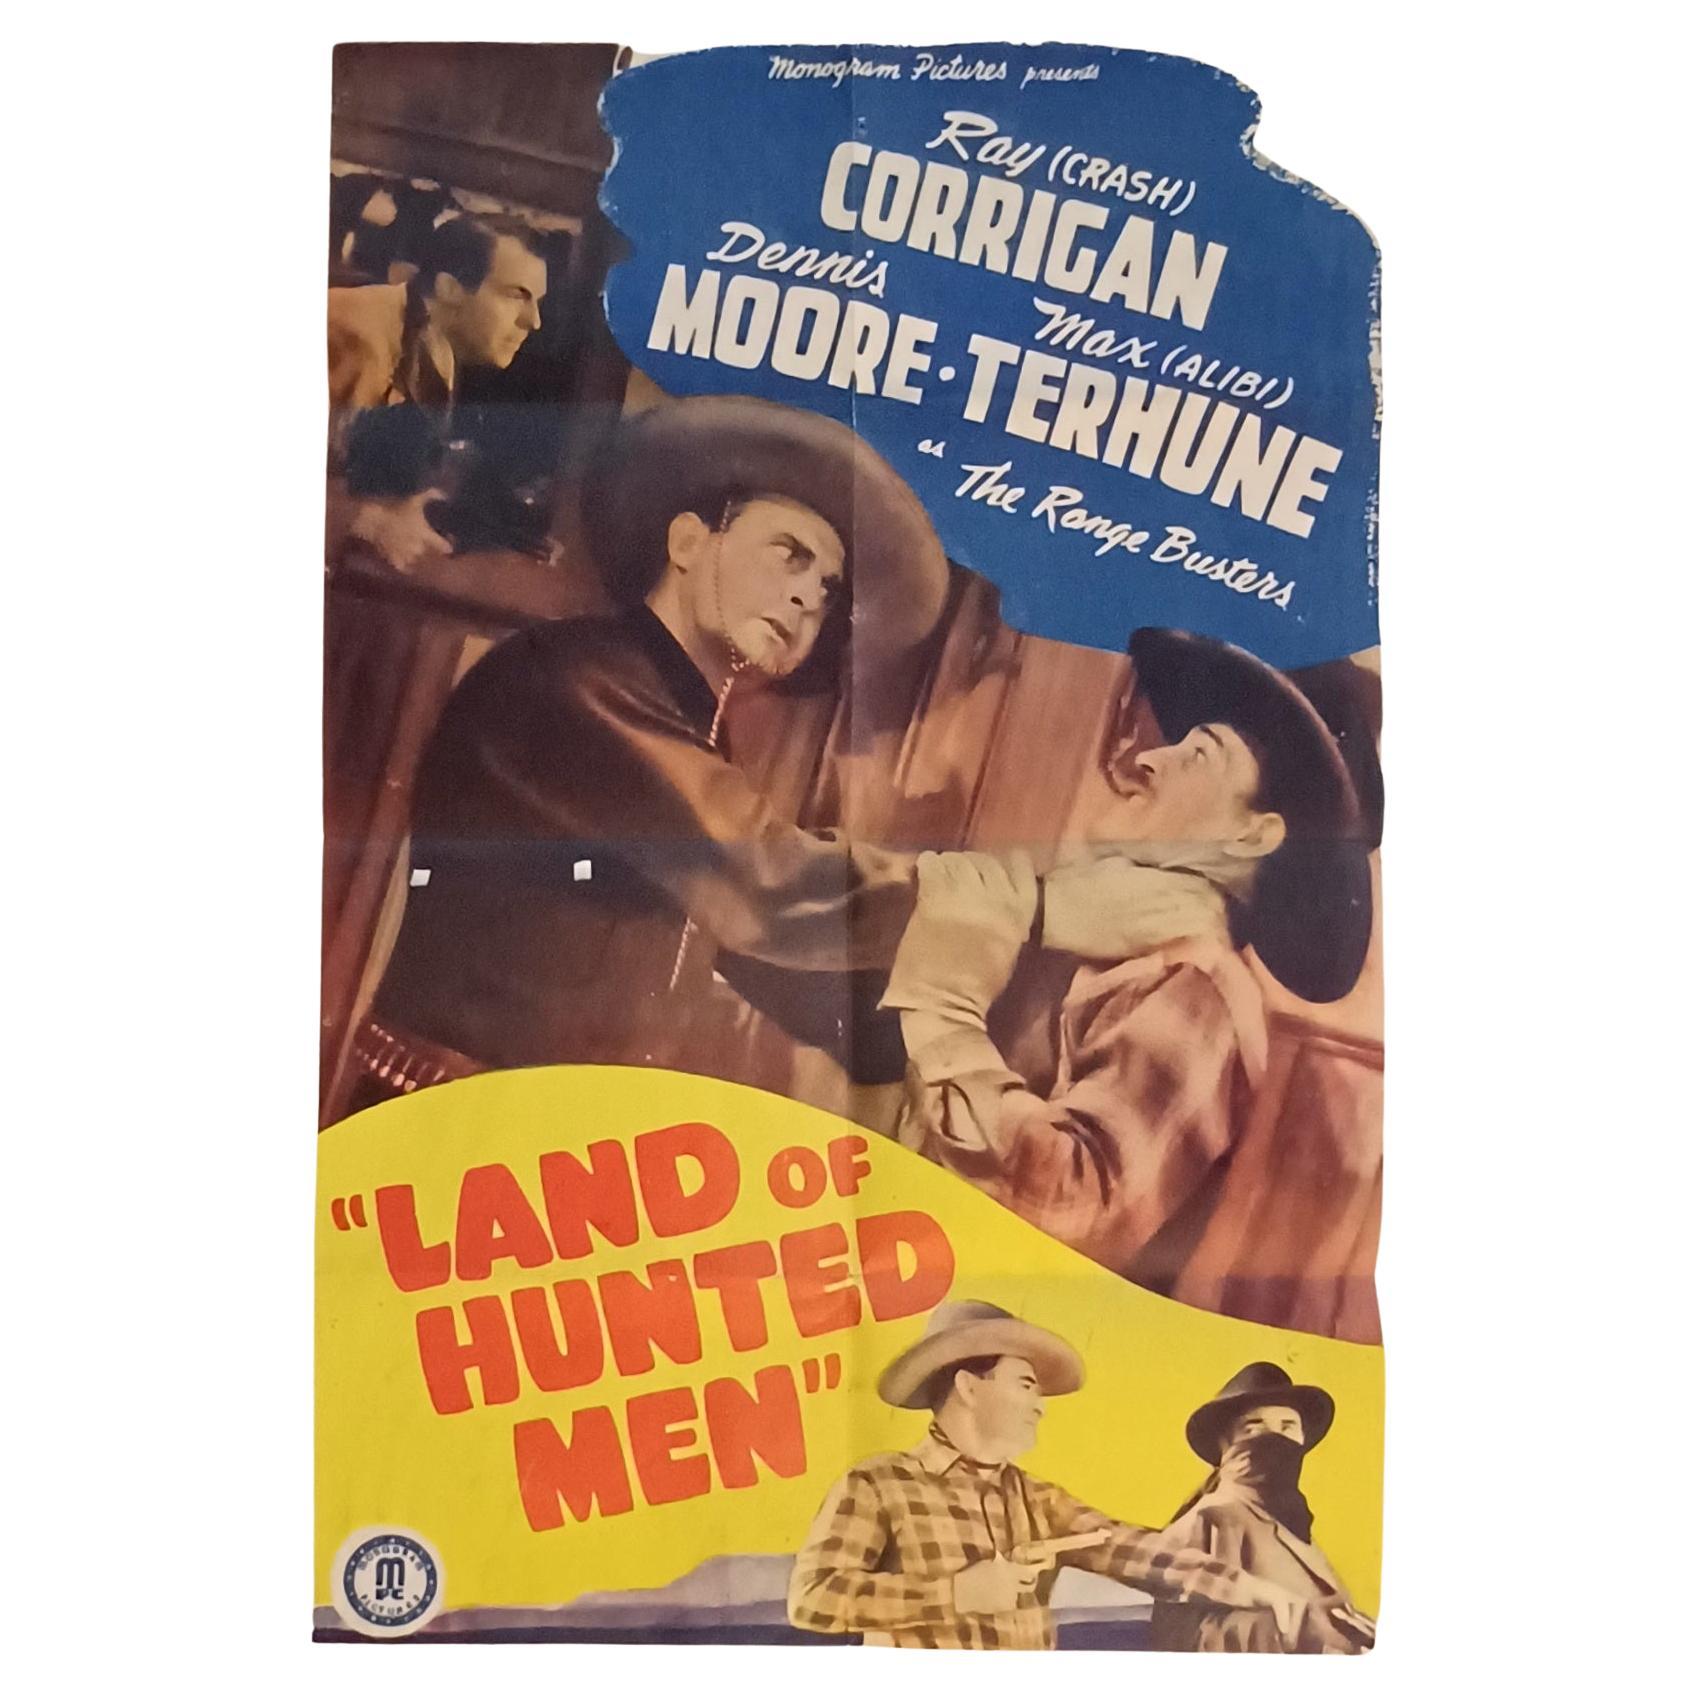 Movie Poster for the 1943 American  Movie "Land of Hunted Men"".